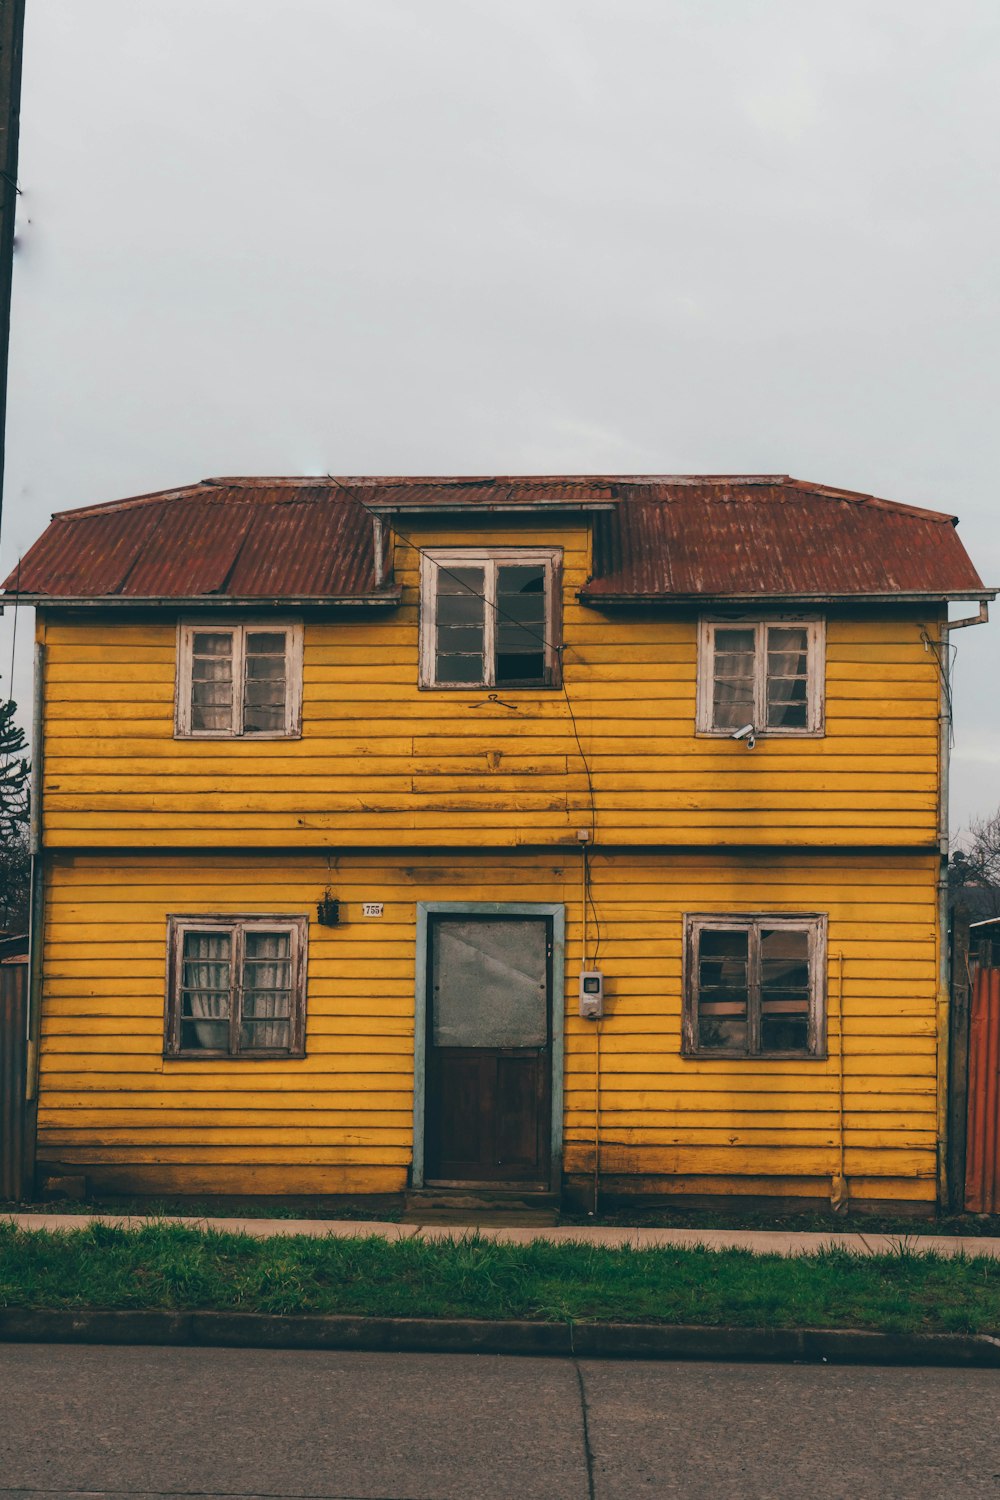 an old yellow house with a rusty roof